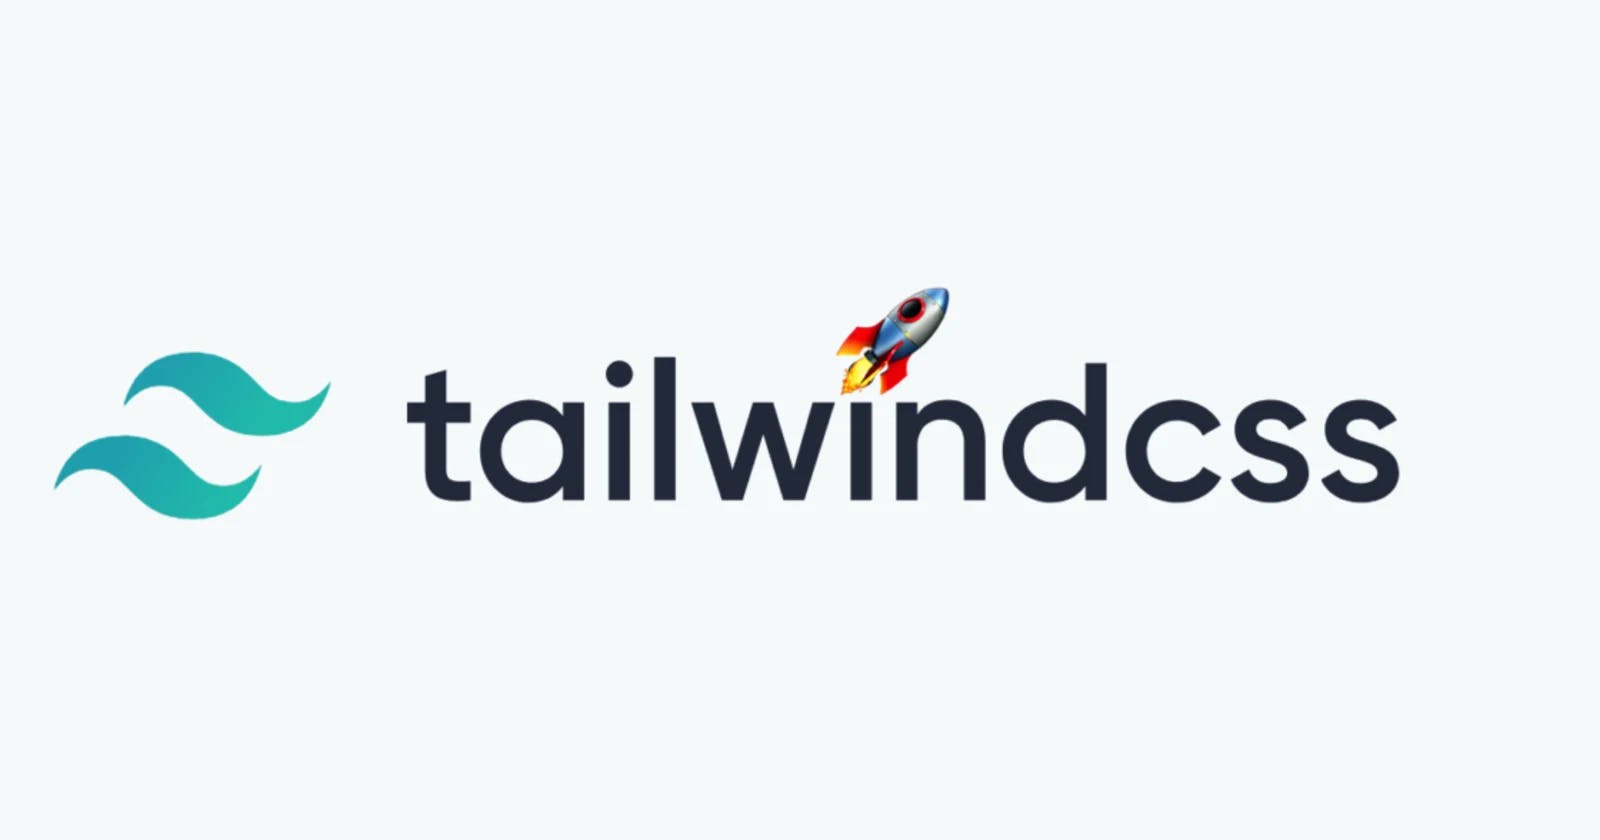 How to use background image in Tailwind CSS ?